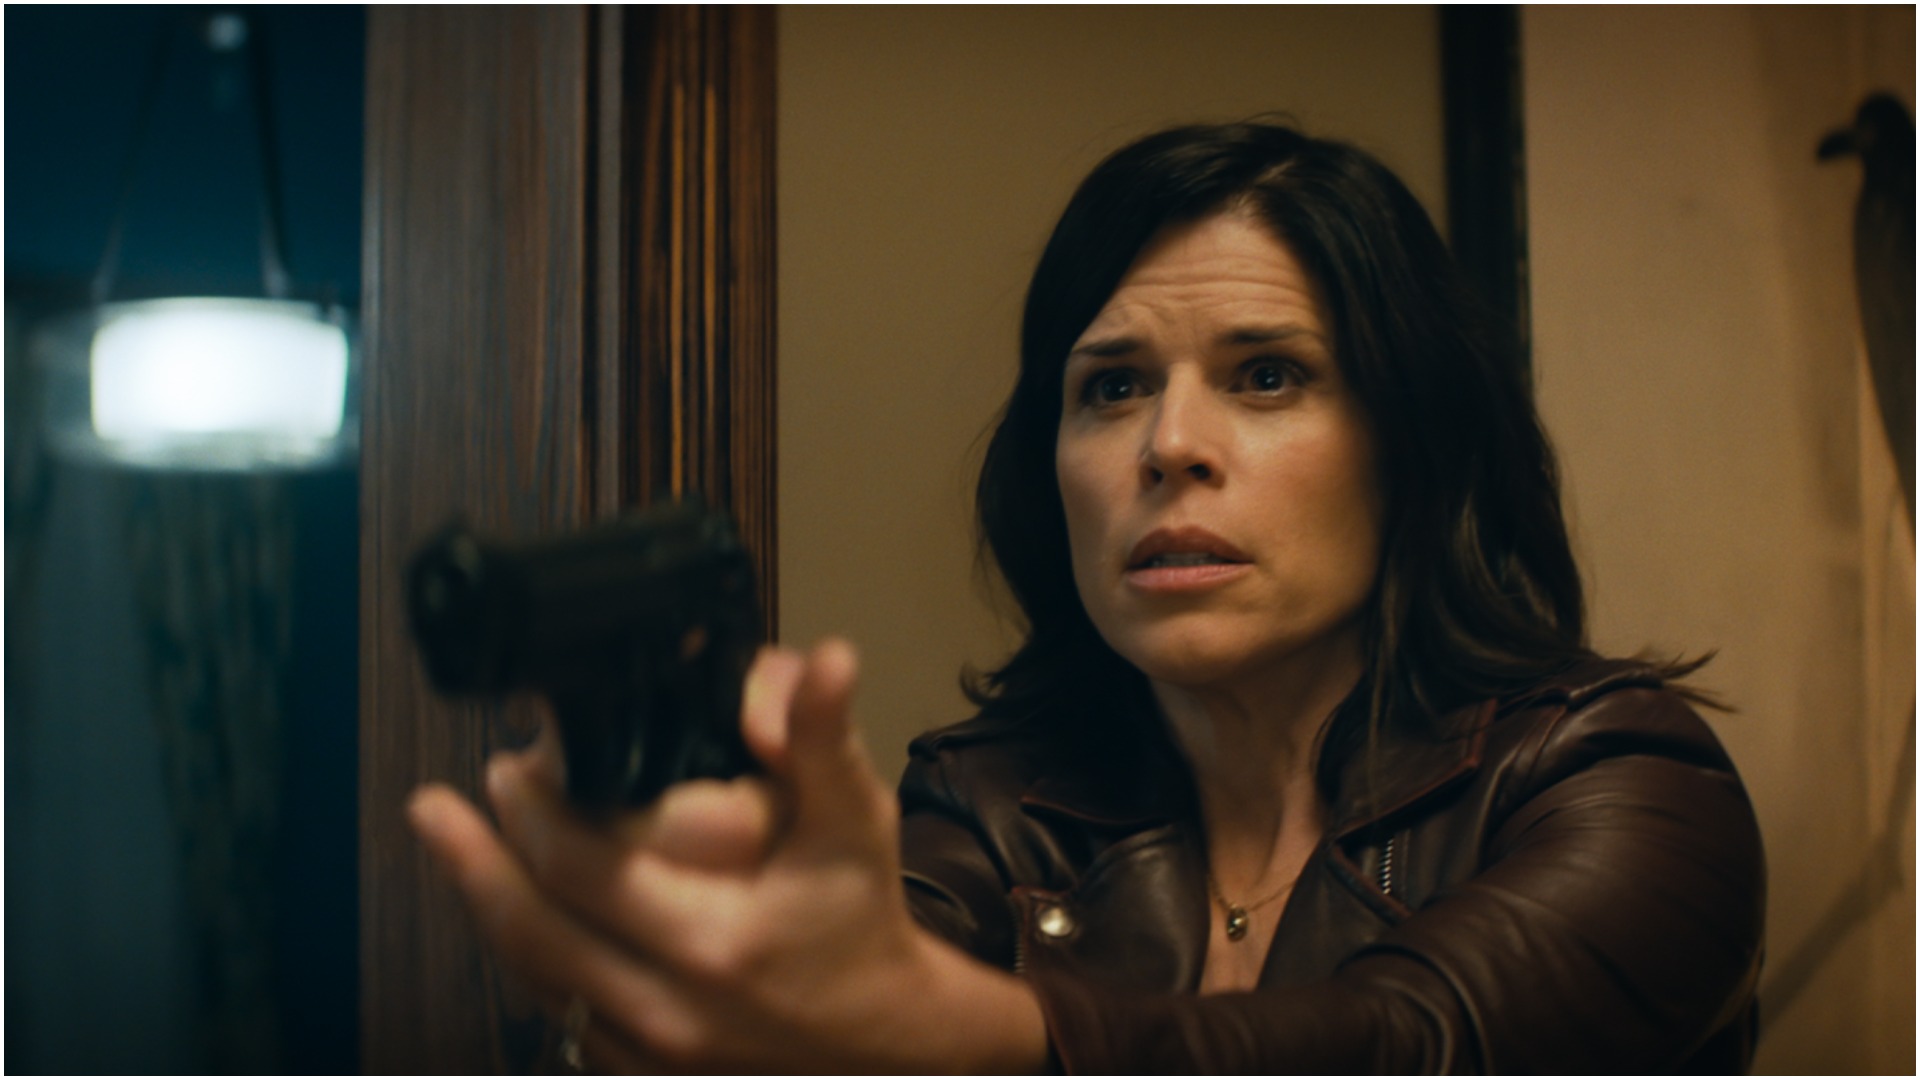 Scream veteran Neve Campbell won’t be in the next movie